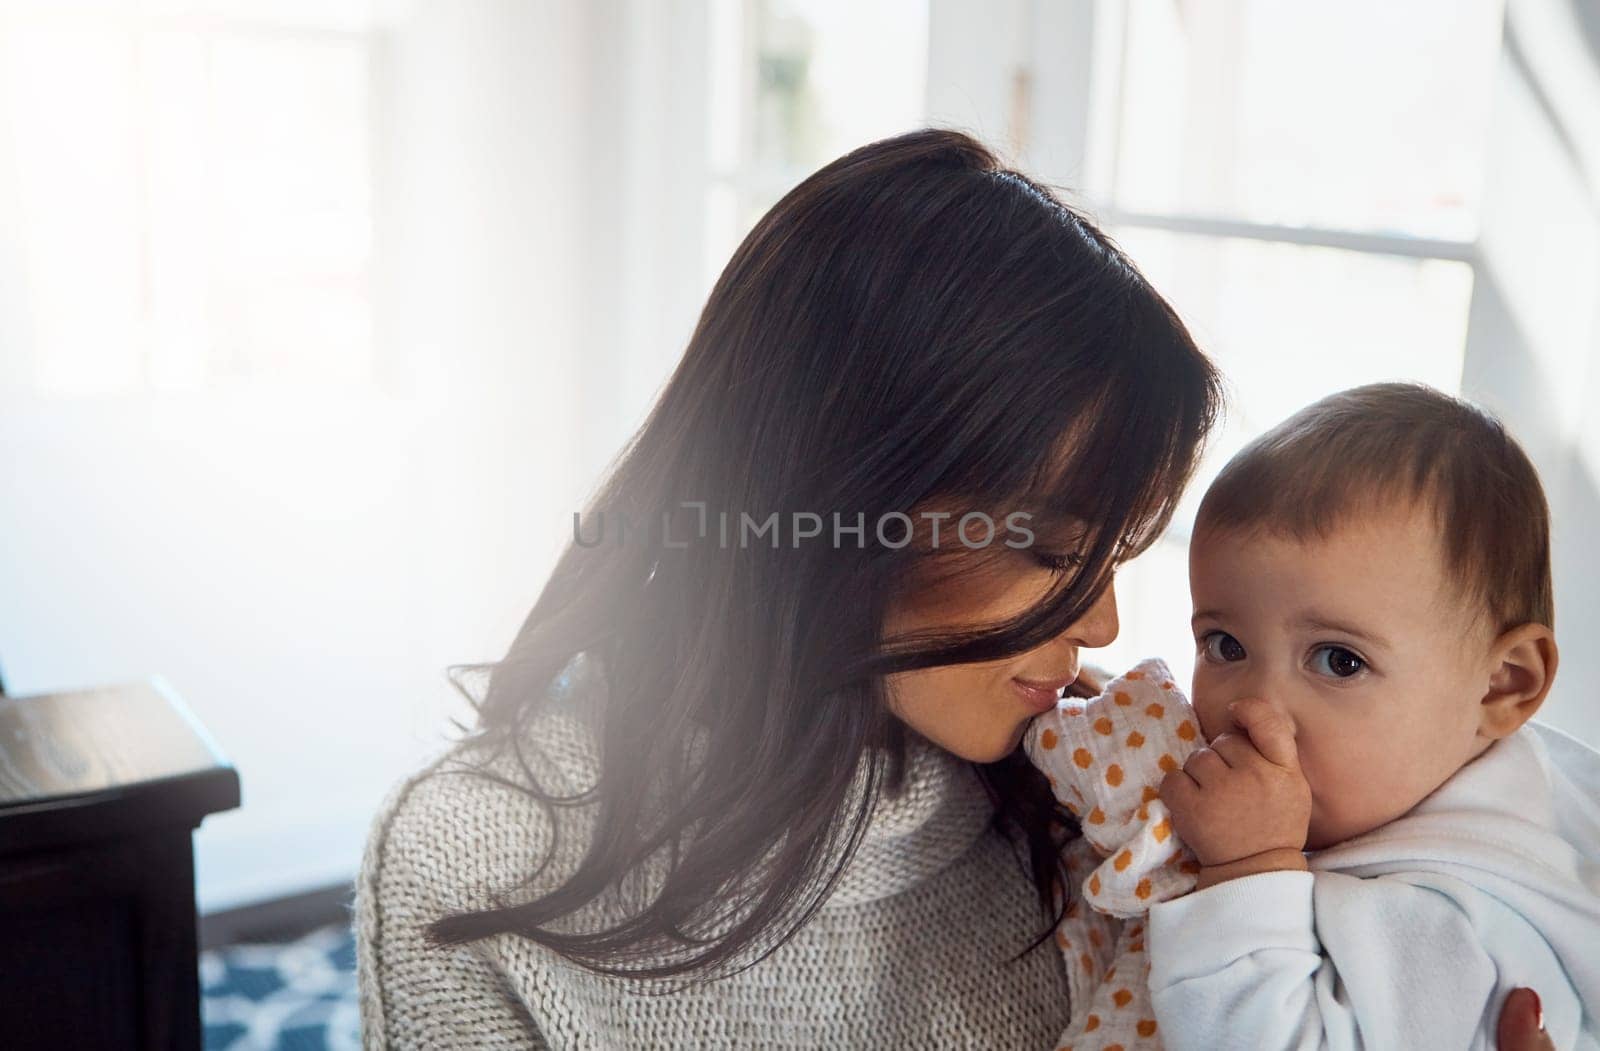 So beautiful, that mother daughter bond. an adorable baby girl bonding with her mother at home